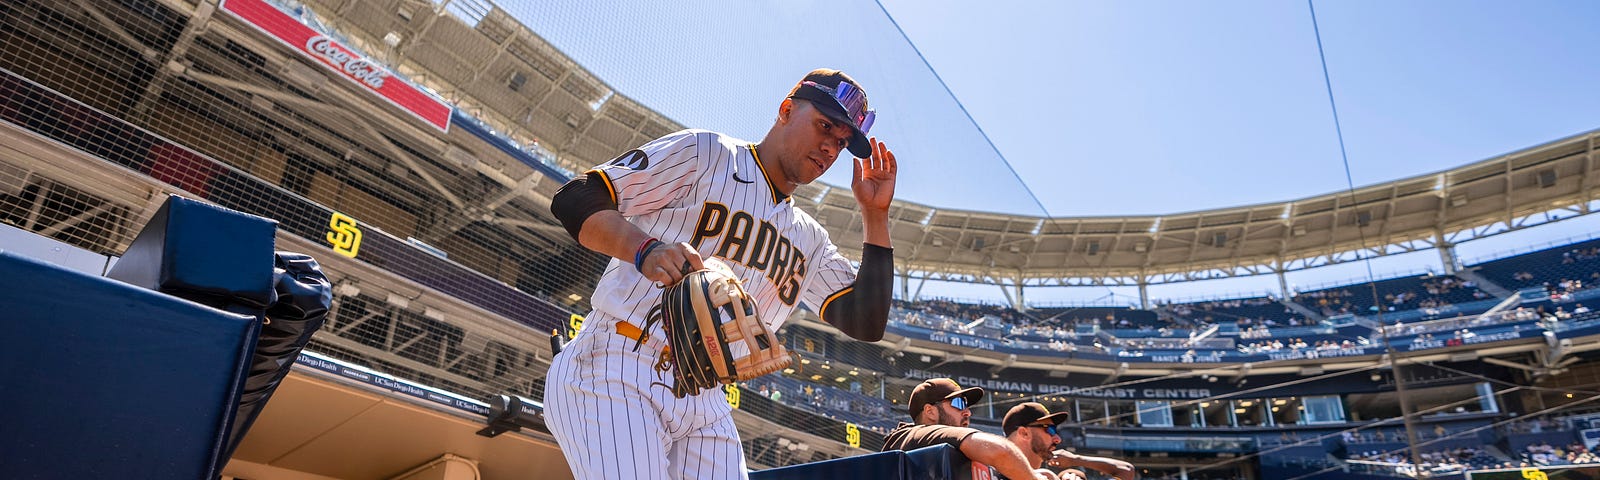 BOB'S BRIEFING: Snell Preps for Sunday; Thoughts on Strong Finish,  Martinez, Campusano, Kim, Batten, Grisham, by FriarWire, Sep, 2023